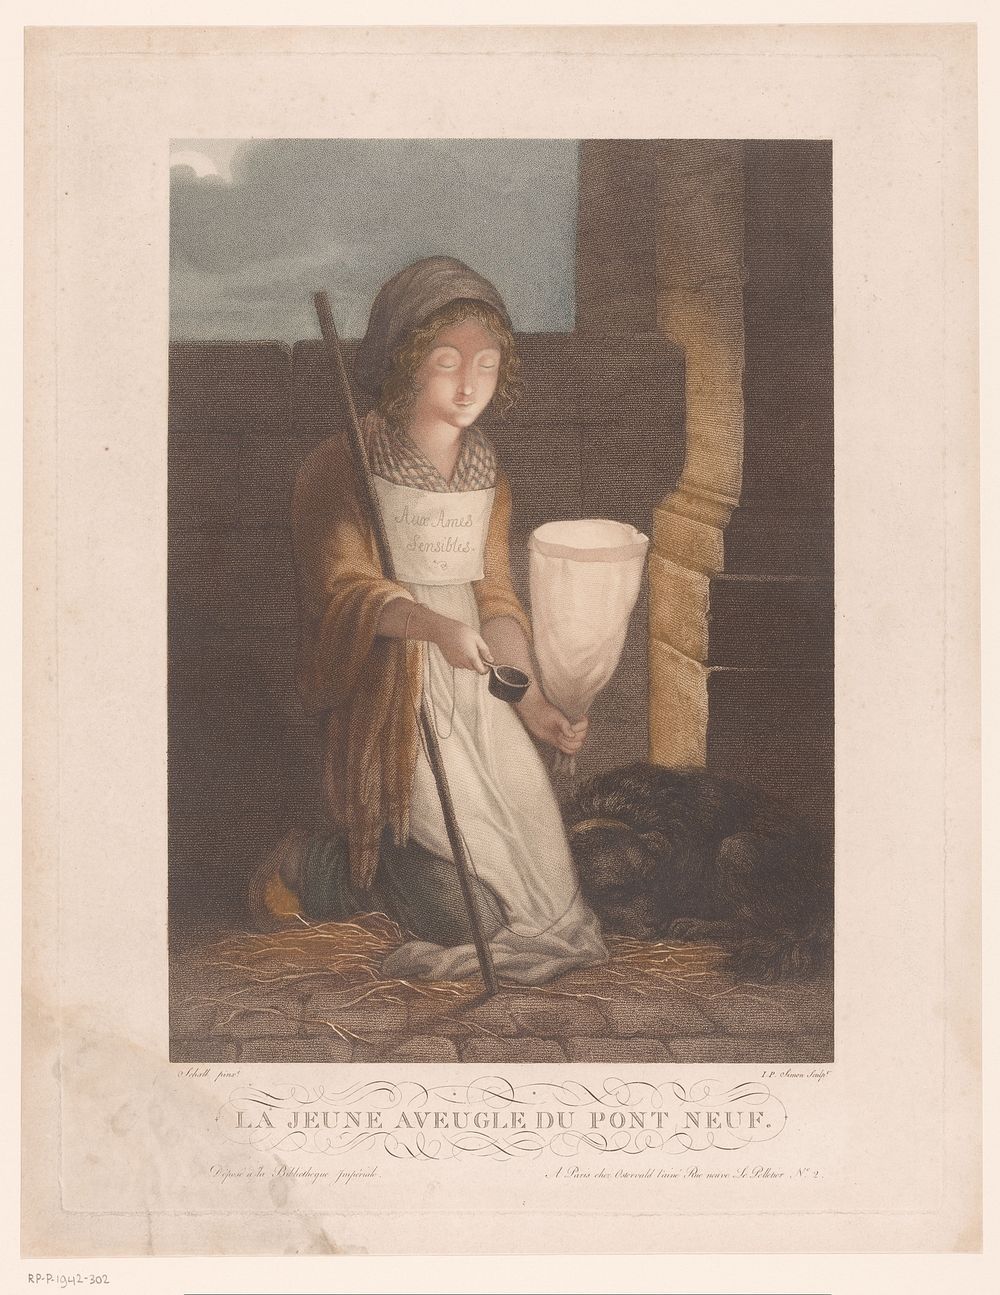 Blinde bedelares met hond (1779 - c. 1820) by Pierre Simon II, Jean Frédéric Schall and Jean Fréderic Ostervald